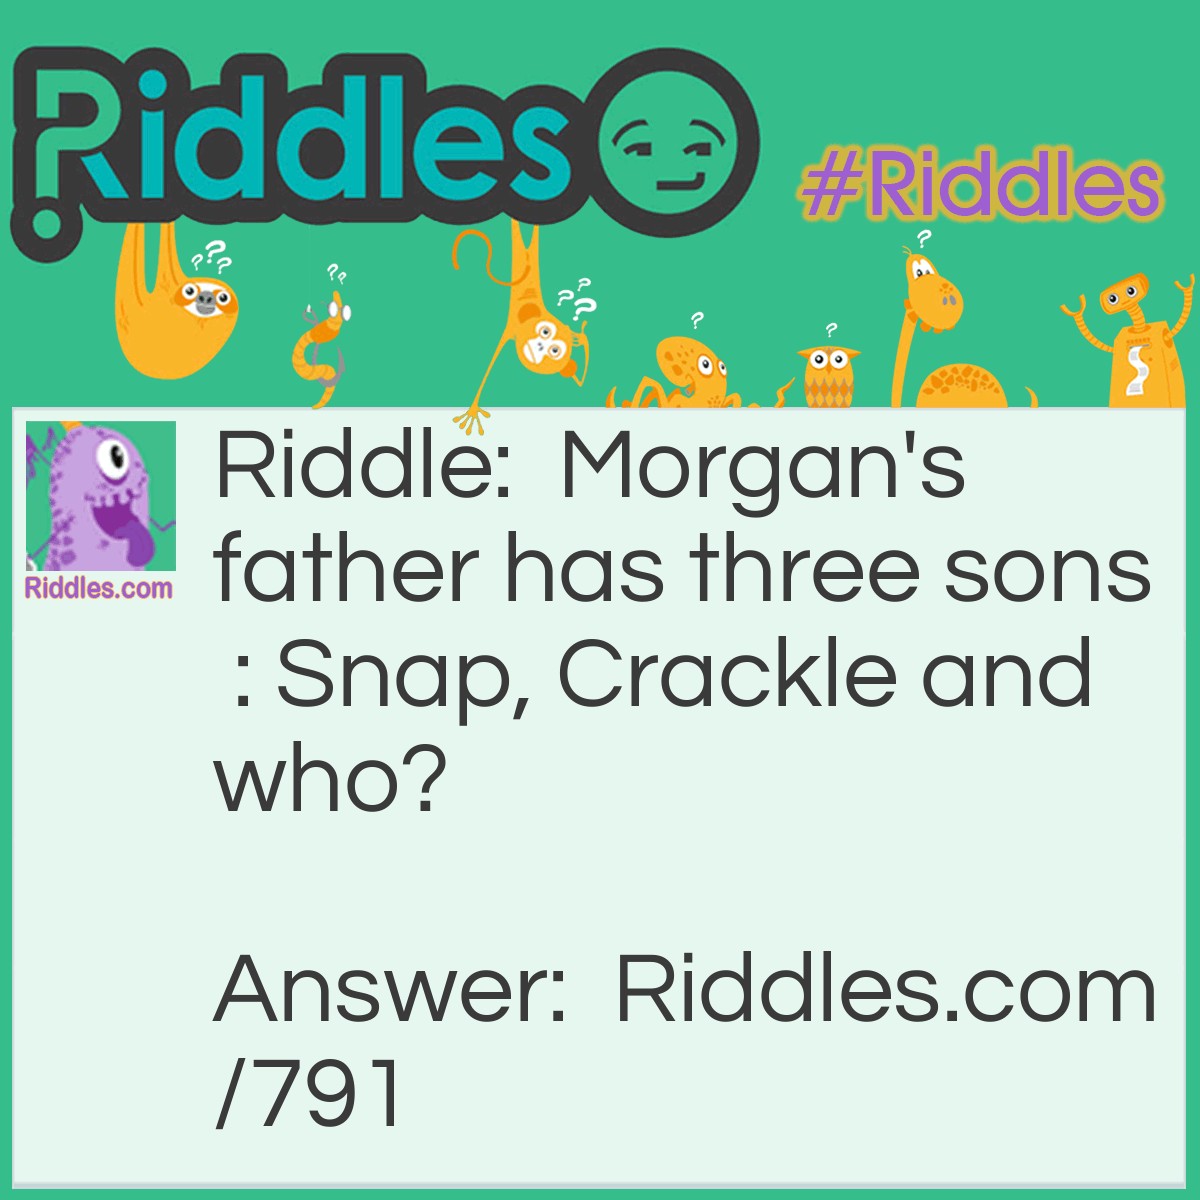 Riddle: Morgan's father has three sons : Snap, Crackle and who? Answer: Did you say Pop? Try Morgan.